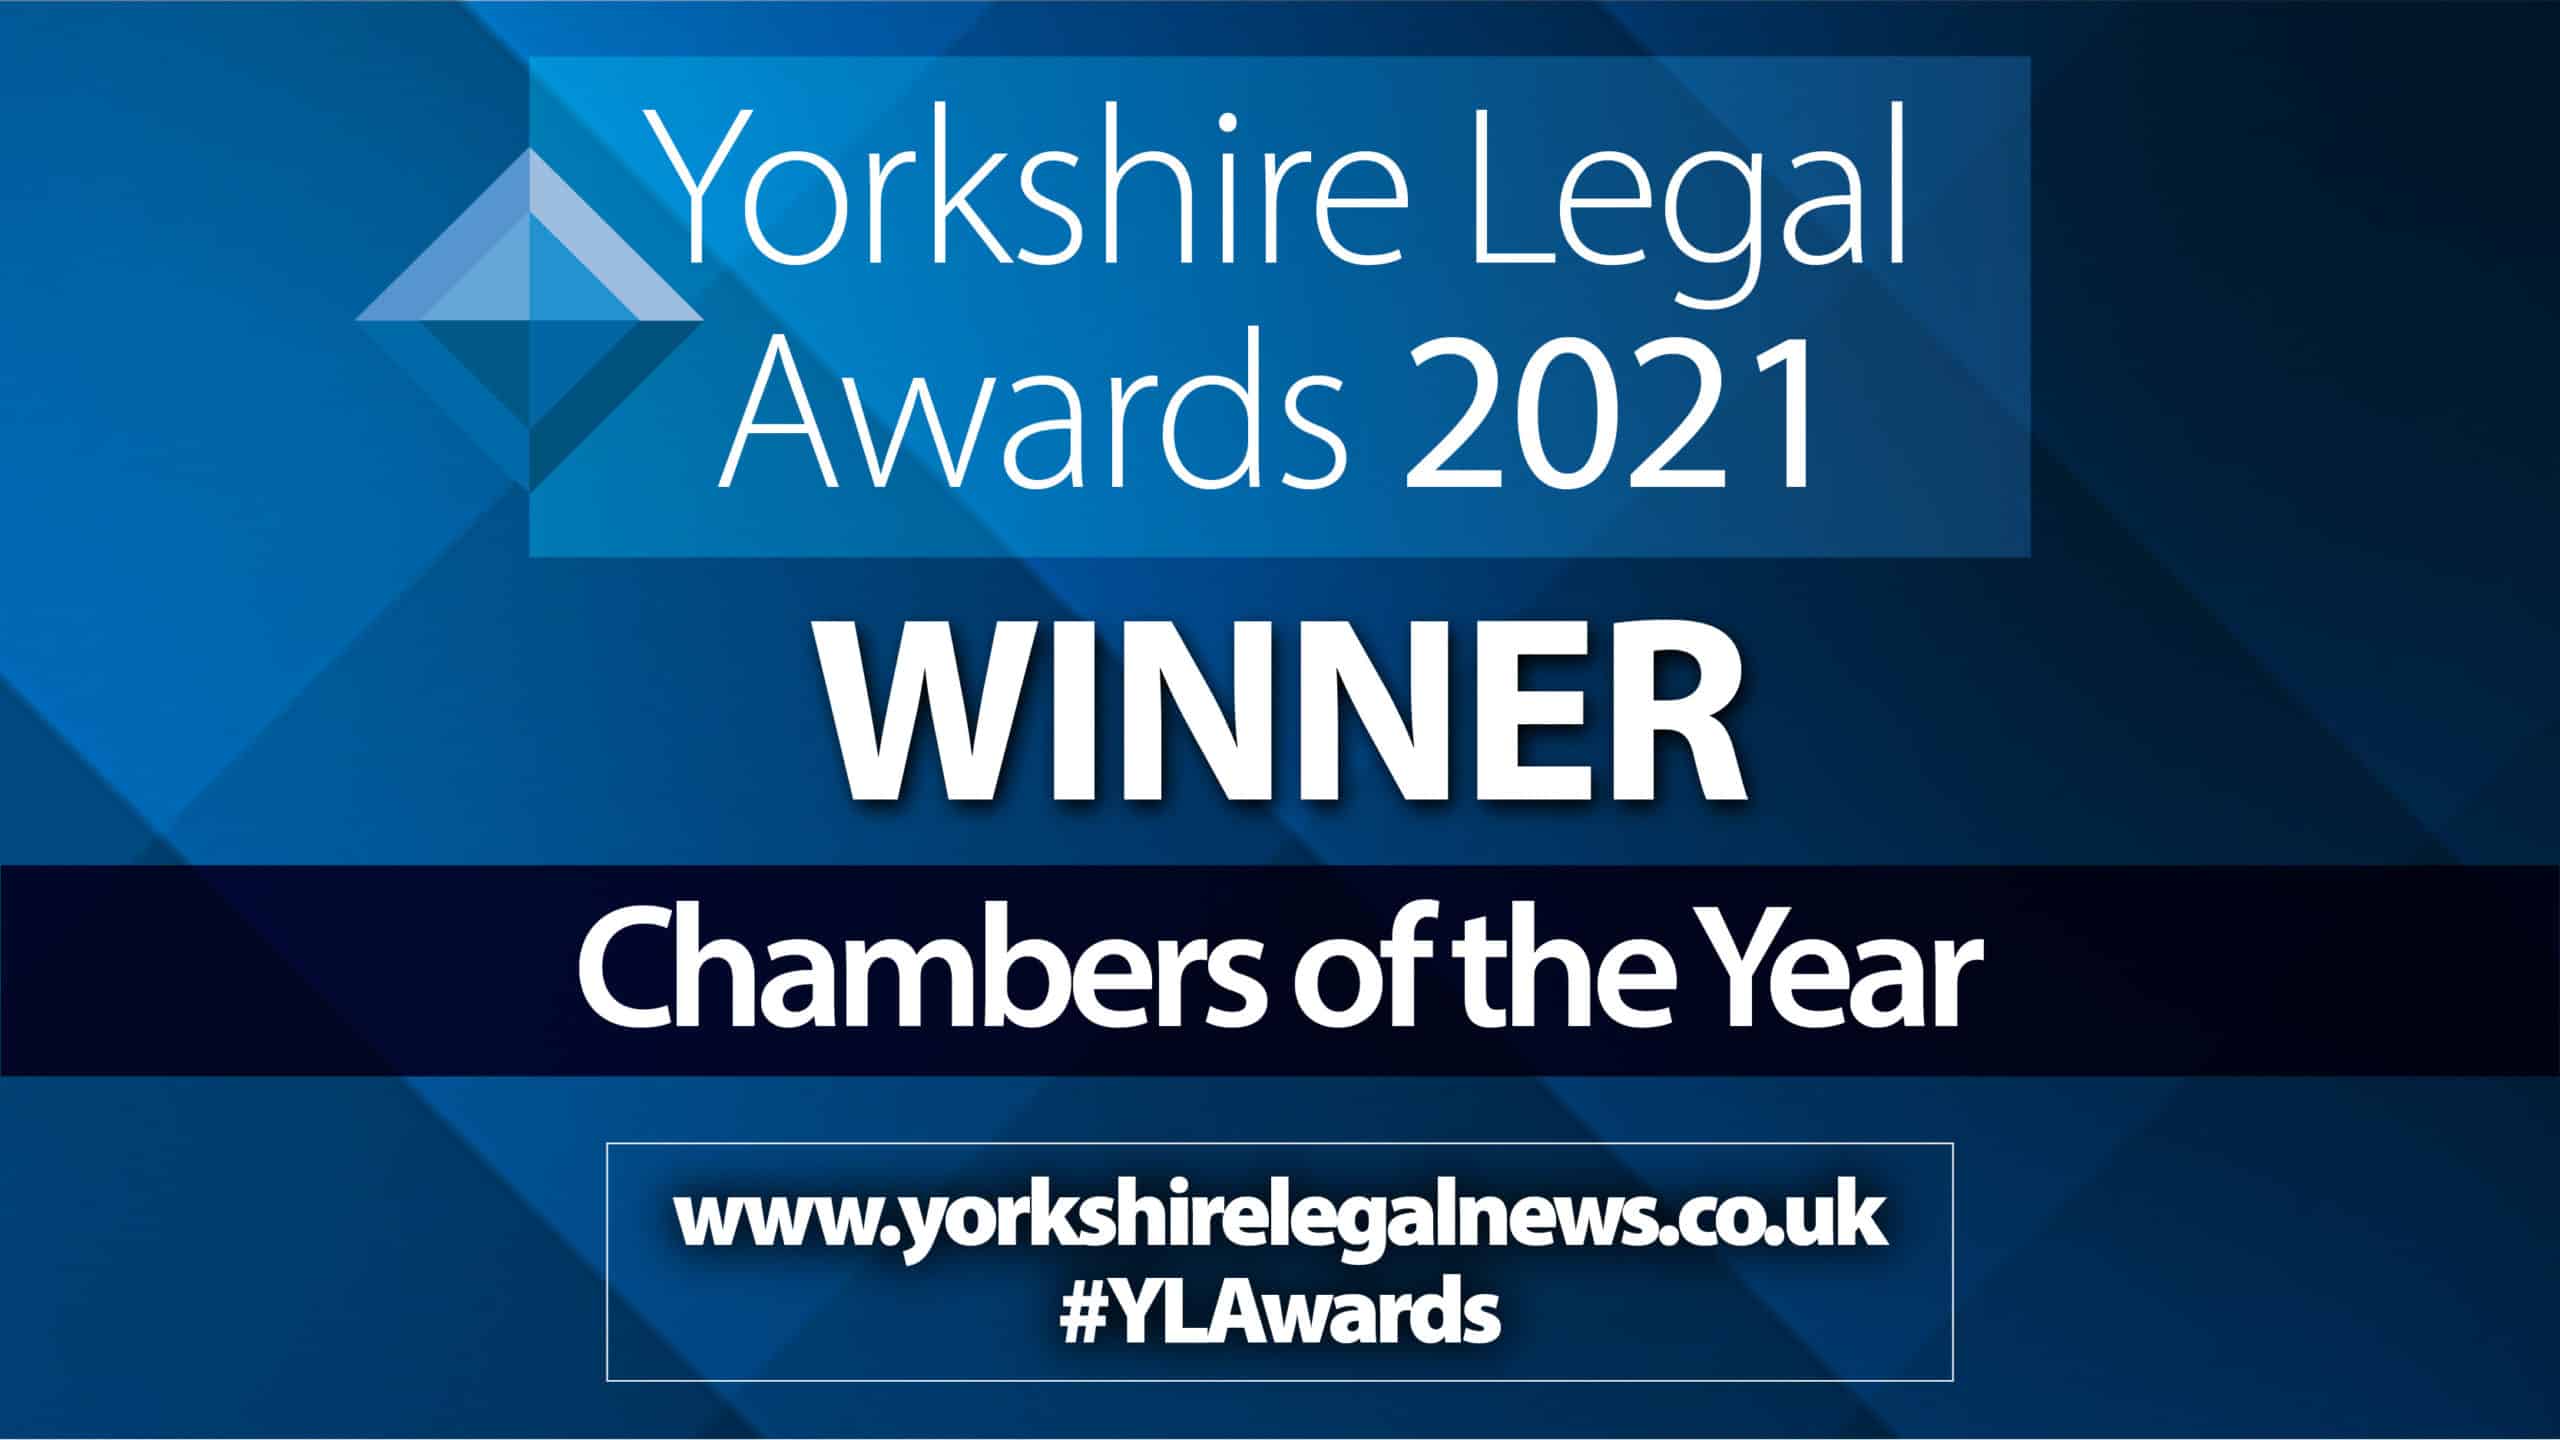 Parklane Plowden Chambers crowned “Chambers of the Year” at the 2021 Yorkshire Legal Awards